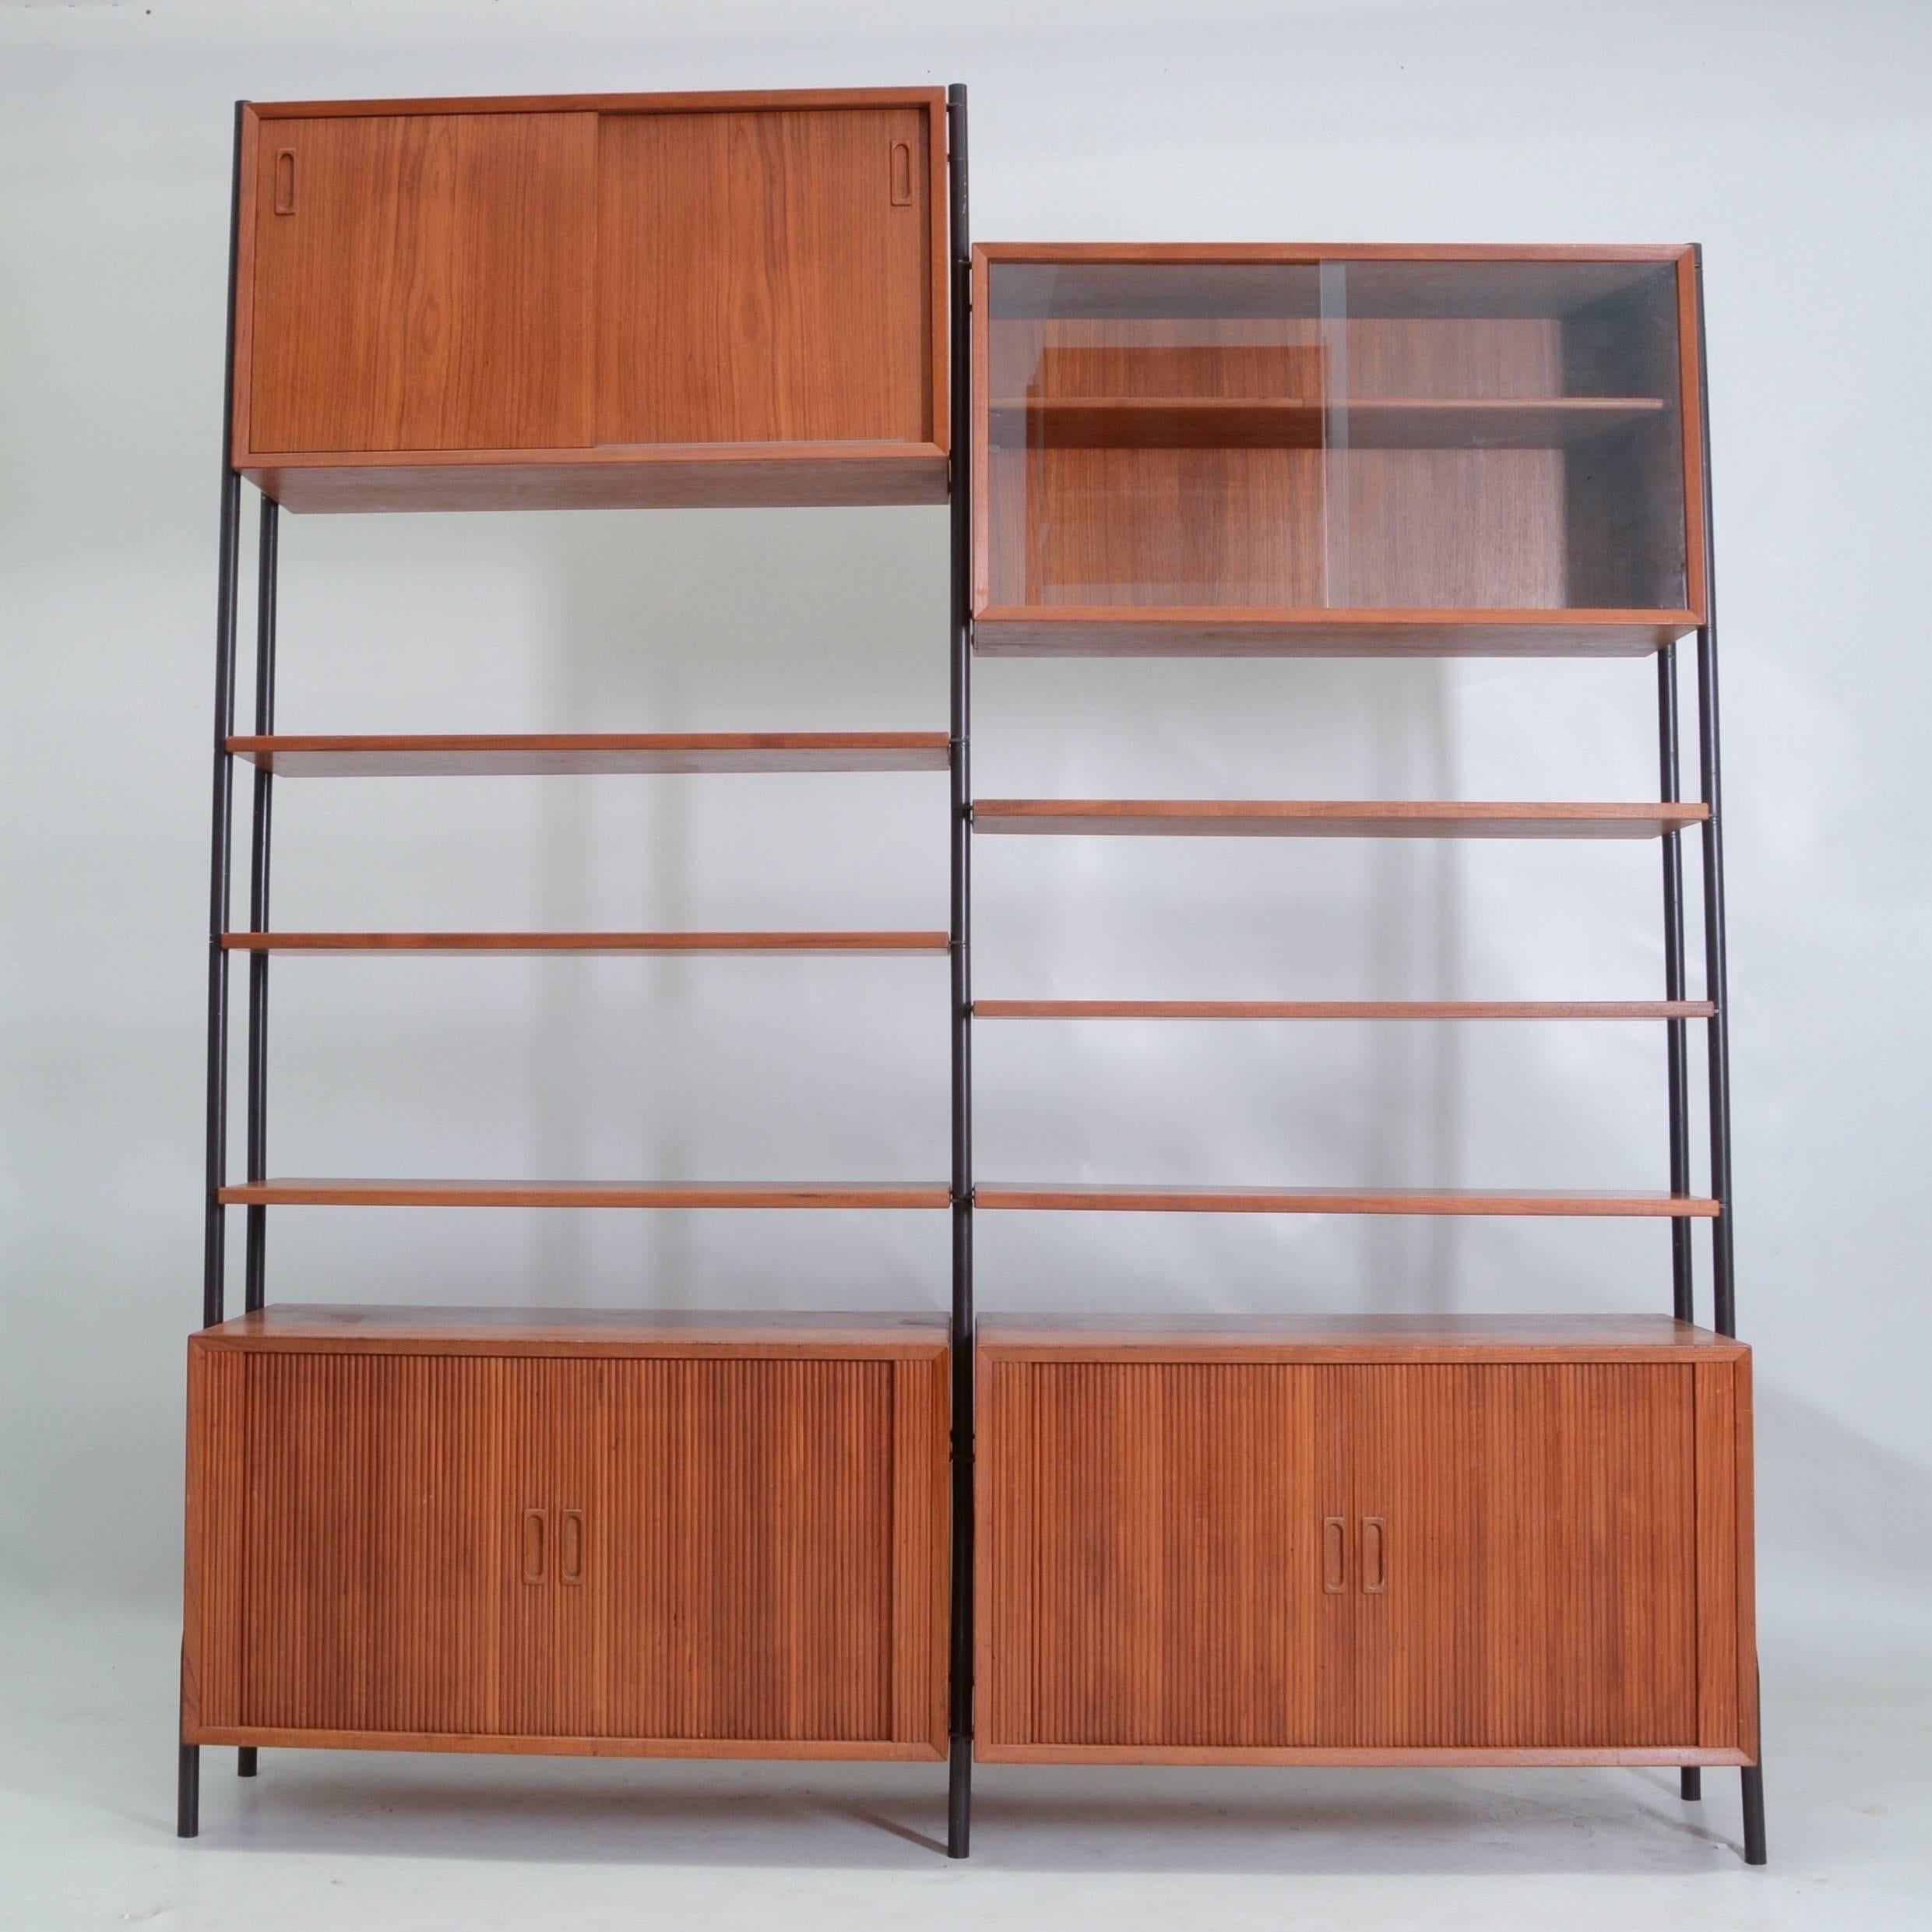 This is a beautiful freestanding teak and steel wall unit by Lyby Mobler of Denmark. This unit features two tambour doored cabinets, one sliding glass door cabinet, one sliding wood door cabinet, multiple shelves and extra corner shelves not